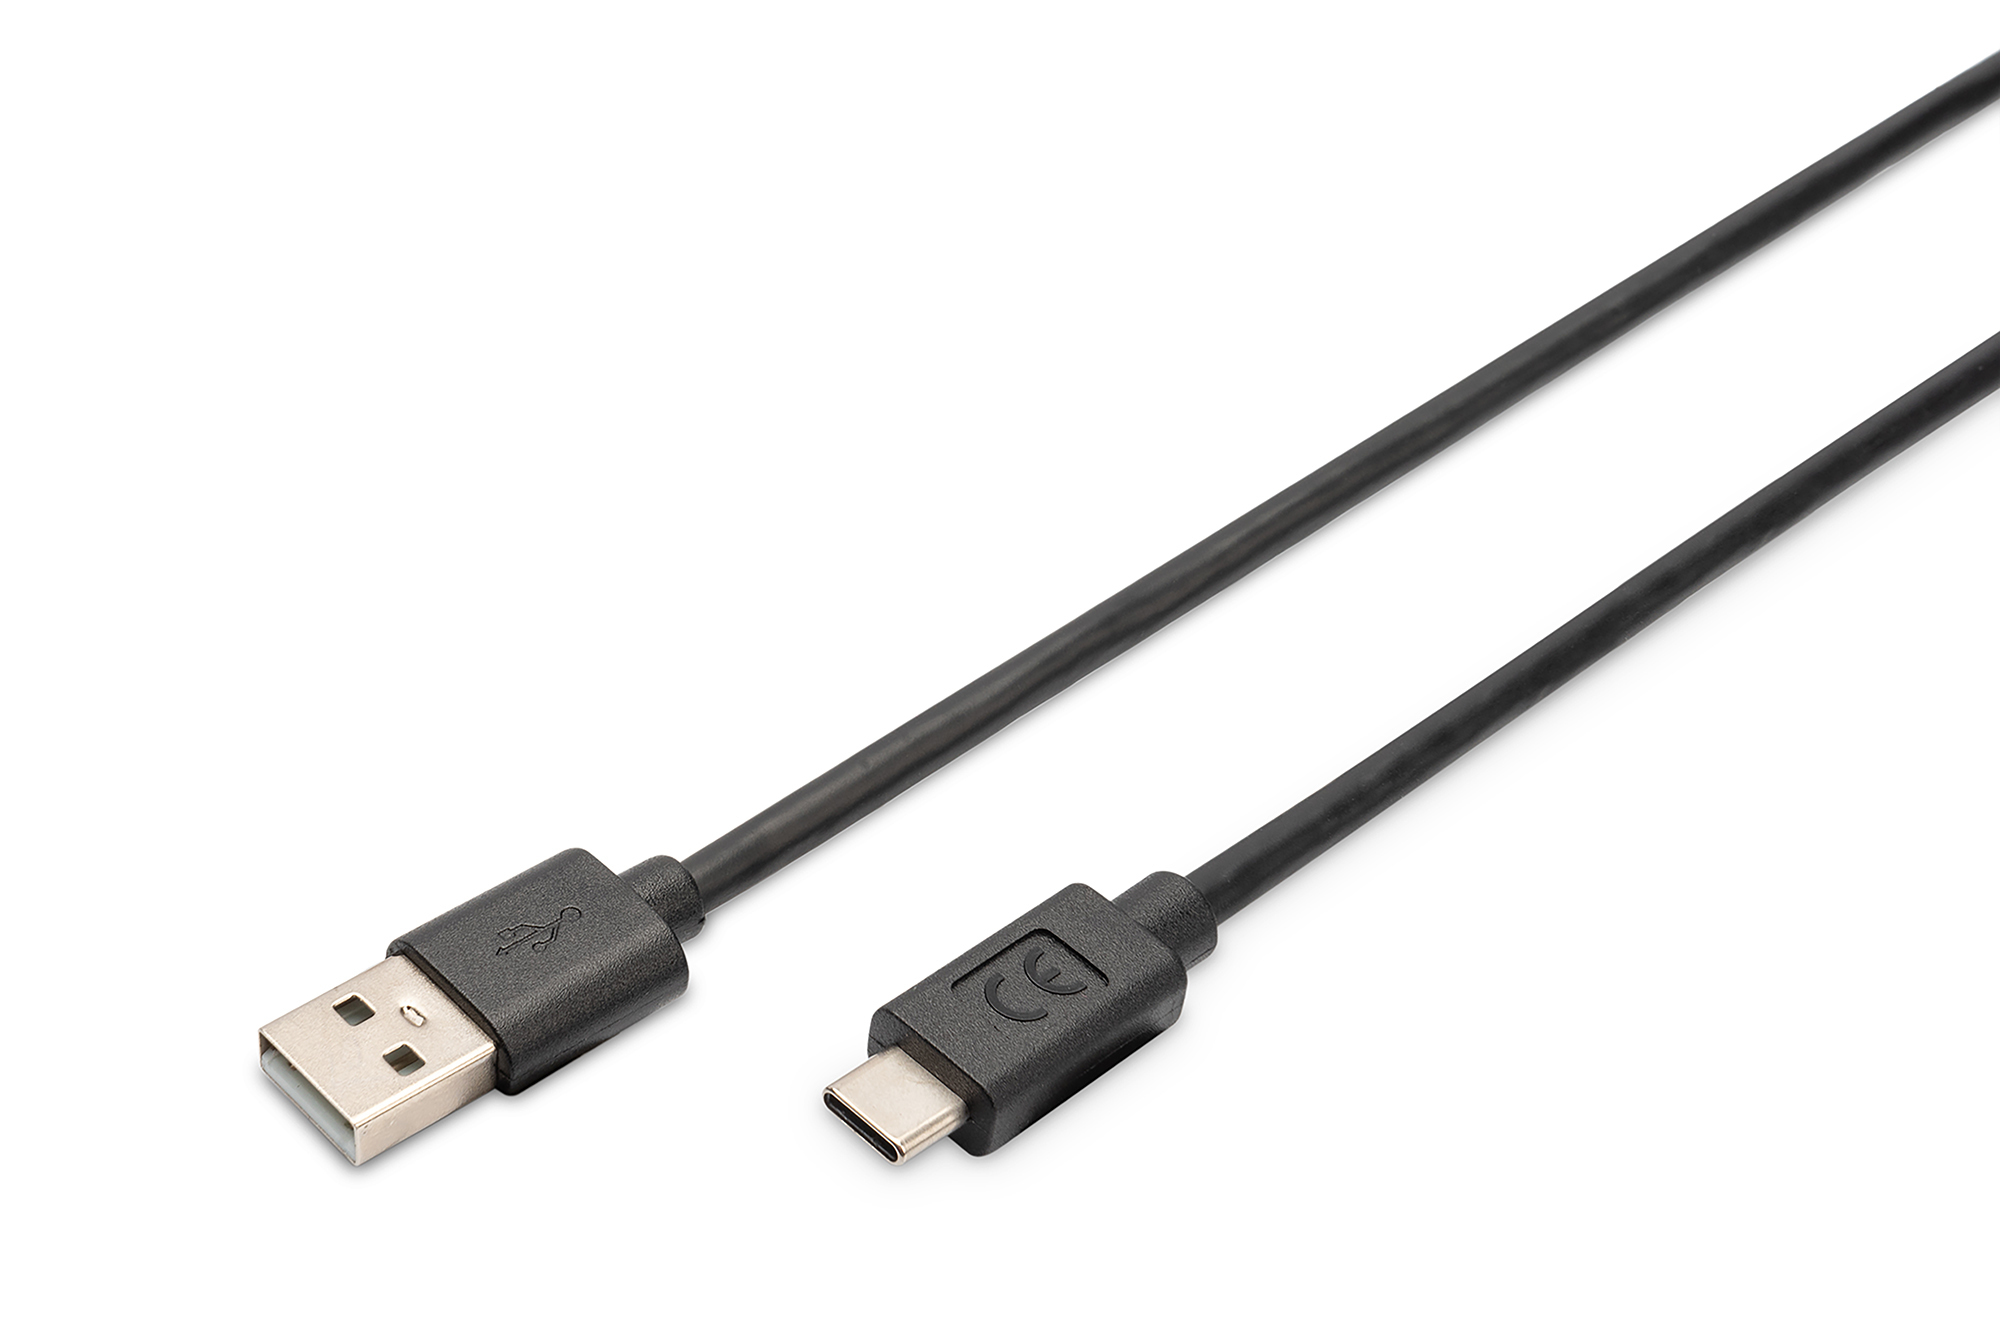 Photos - Cable (video, audio, USB) Digitus USB Type-C connection cable, Type A to C AK-300148-040-S 